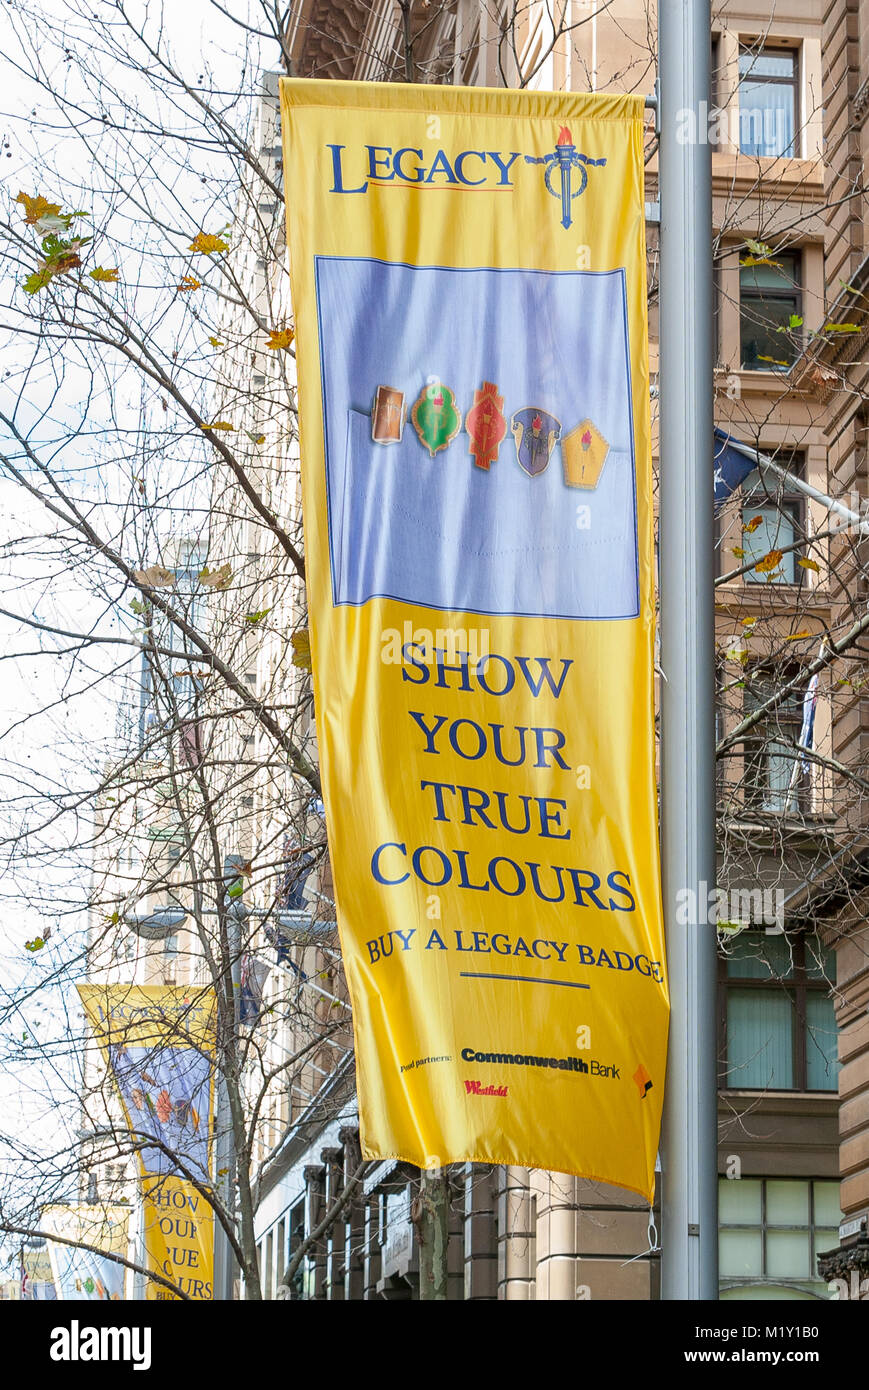 Legacy Week is launched at Martin Place in Sydney Australia for 2006. The popular annual event is well-known throughout Australia for the badge sellers who collect funds from the public to assist Australia's returned services staff and their relatives. Pictured: a Legacy Week banner in Martin Place. Stock Photo